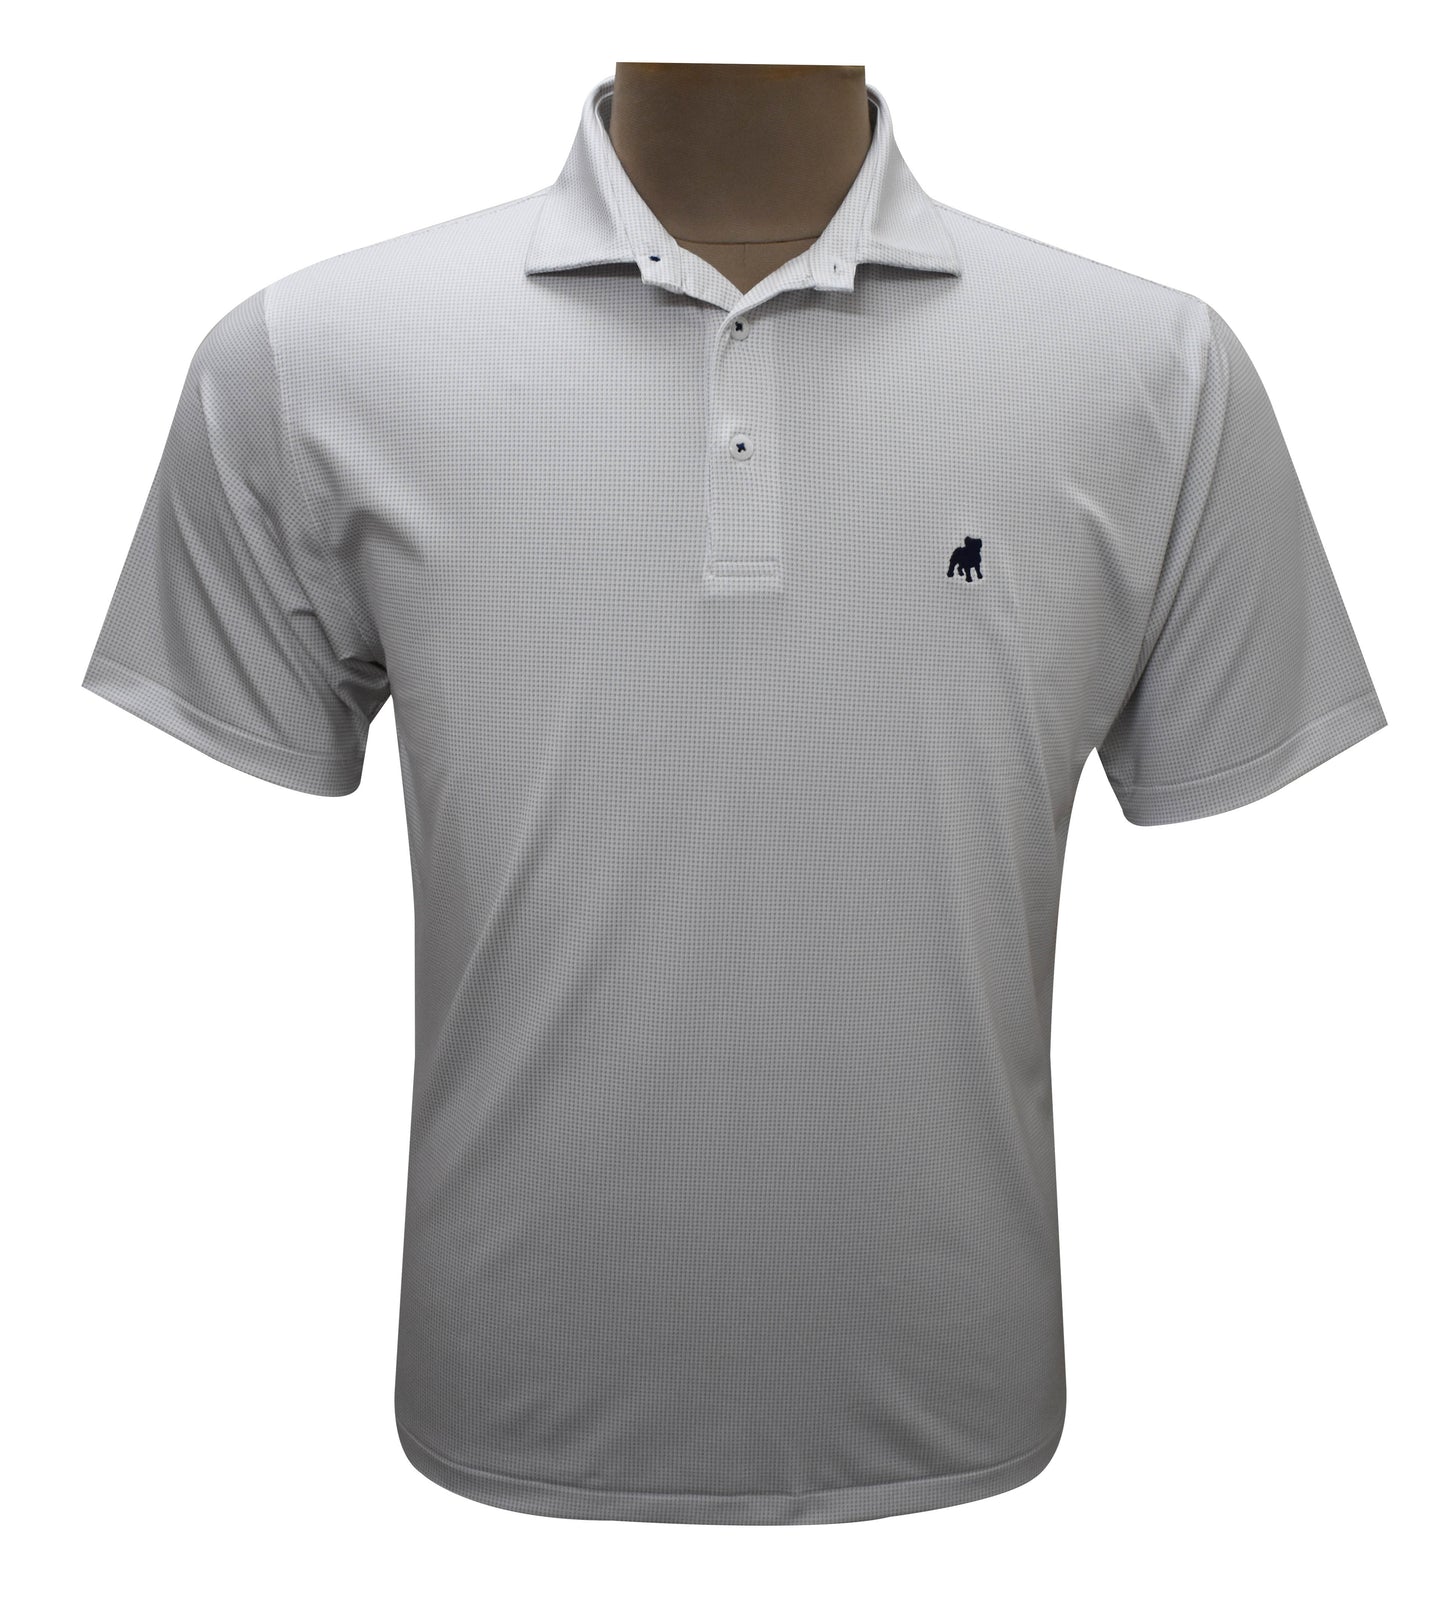 Grey and White Checkered Polo by Horn Legend